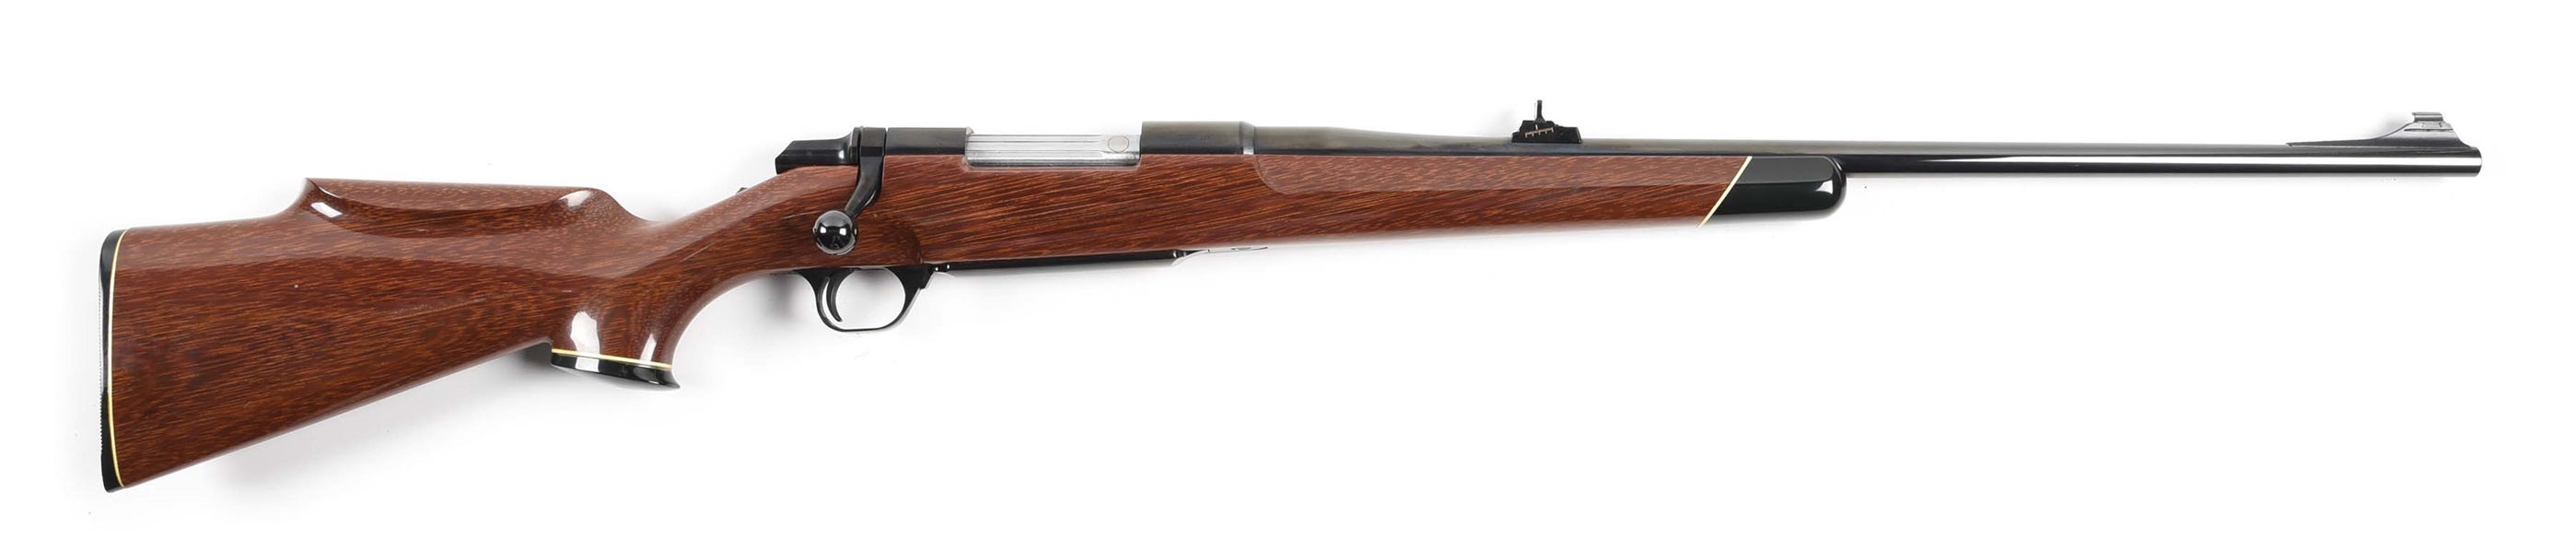 (M) BROWNING BBR BOLT ACTION RIFLE WITH KIAAT STOCK.